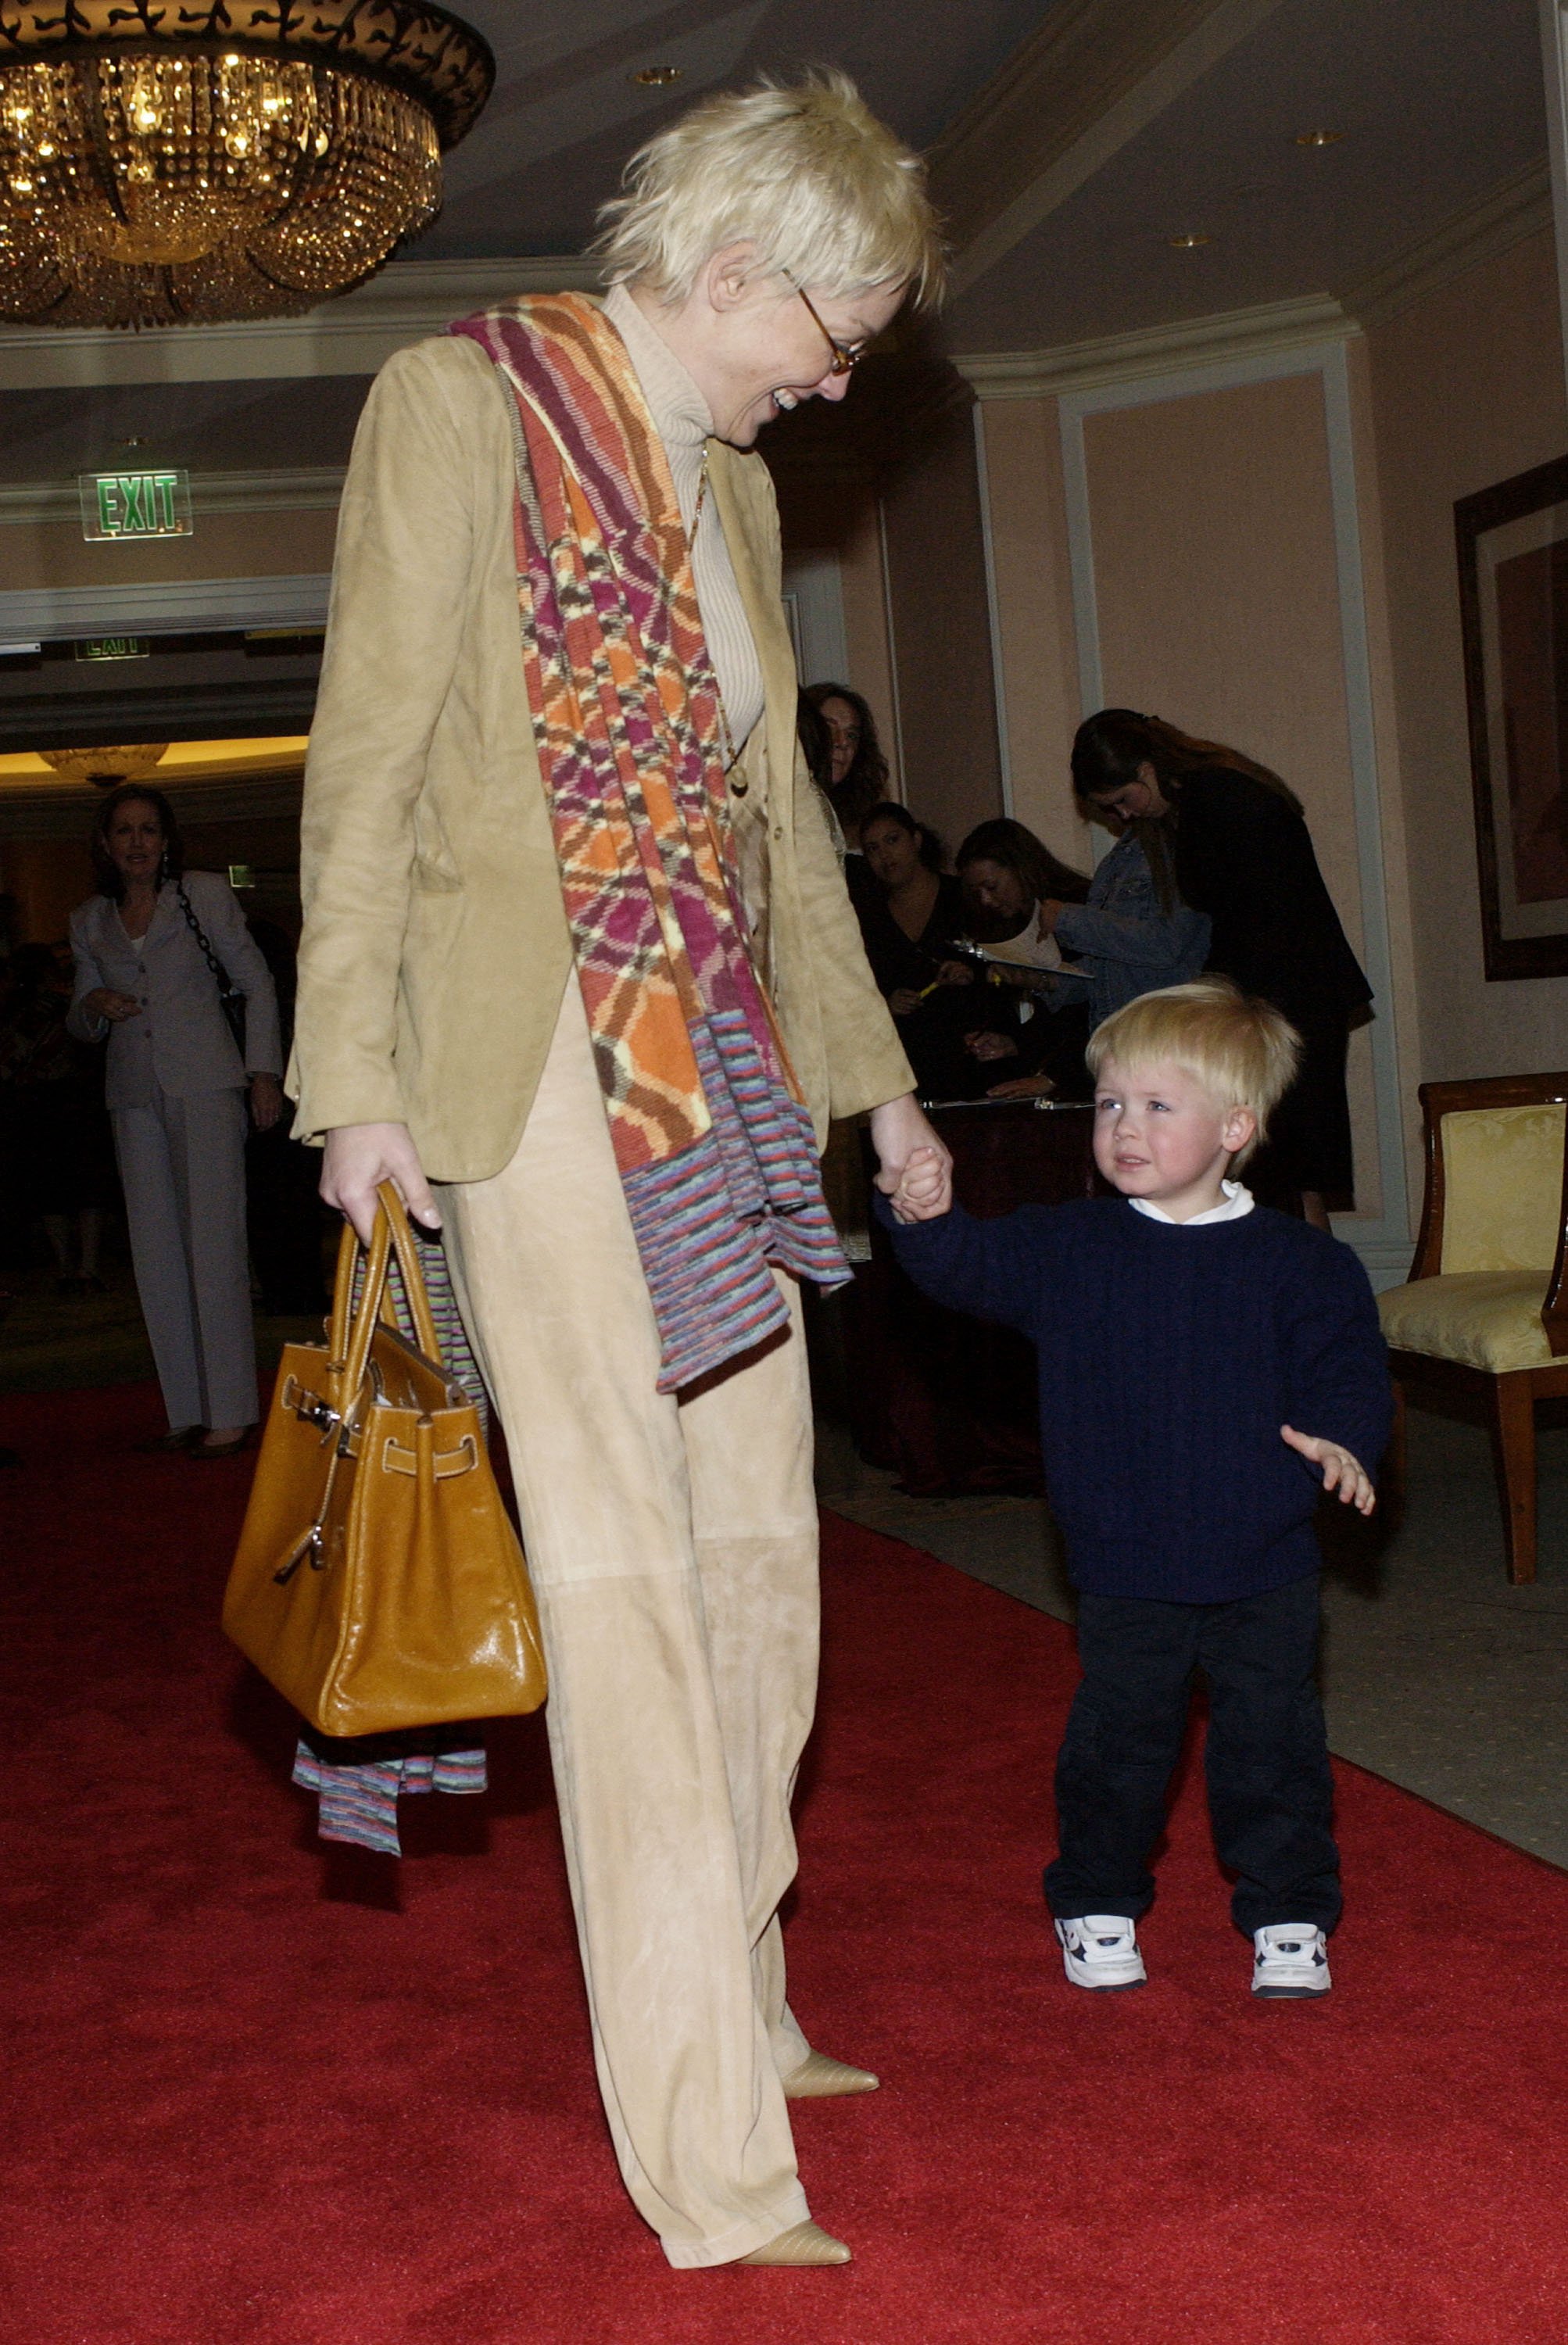 Sharon Stone and her son during the InStyle Sneak Peek at Red Carpet Fashion for The Awards Season in Beverly Hills, California, on January 21, 2004. | Source: Chris Weeks/FilmMagic/Getty Images